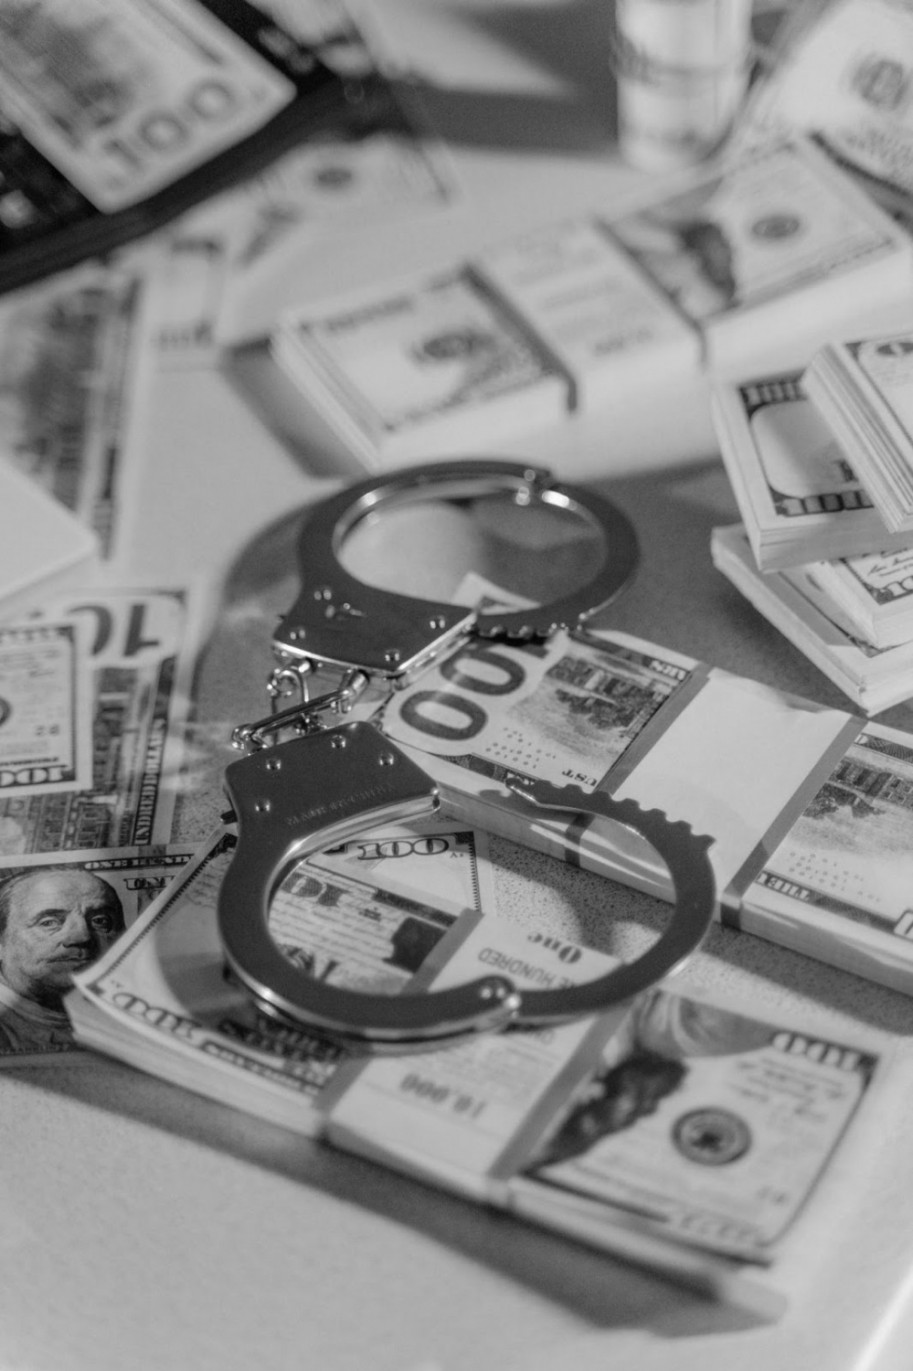 White Collar Crime: What Is It, and Why Is It So Difficult To Punish?